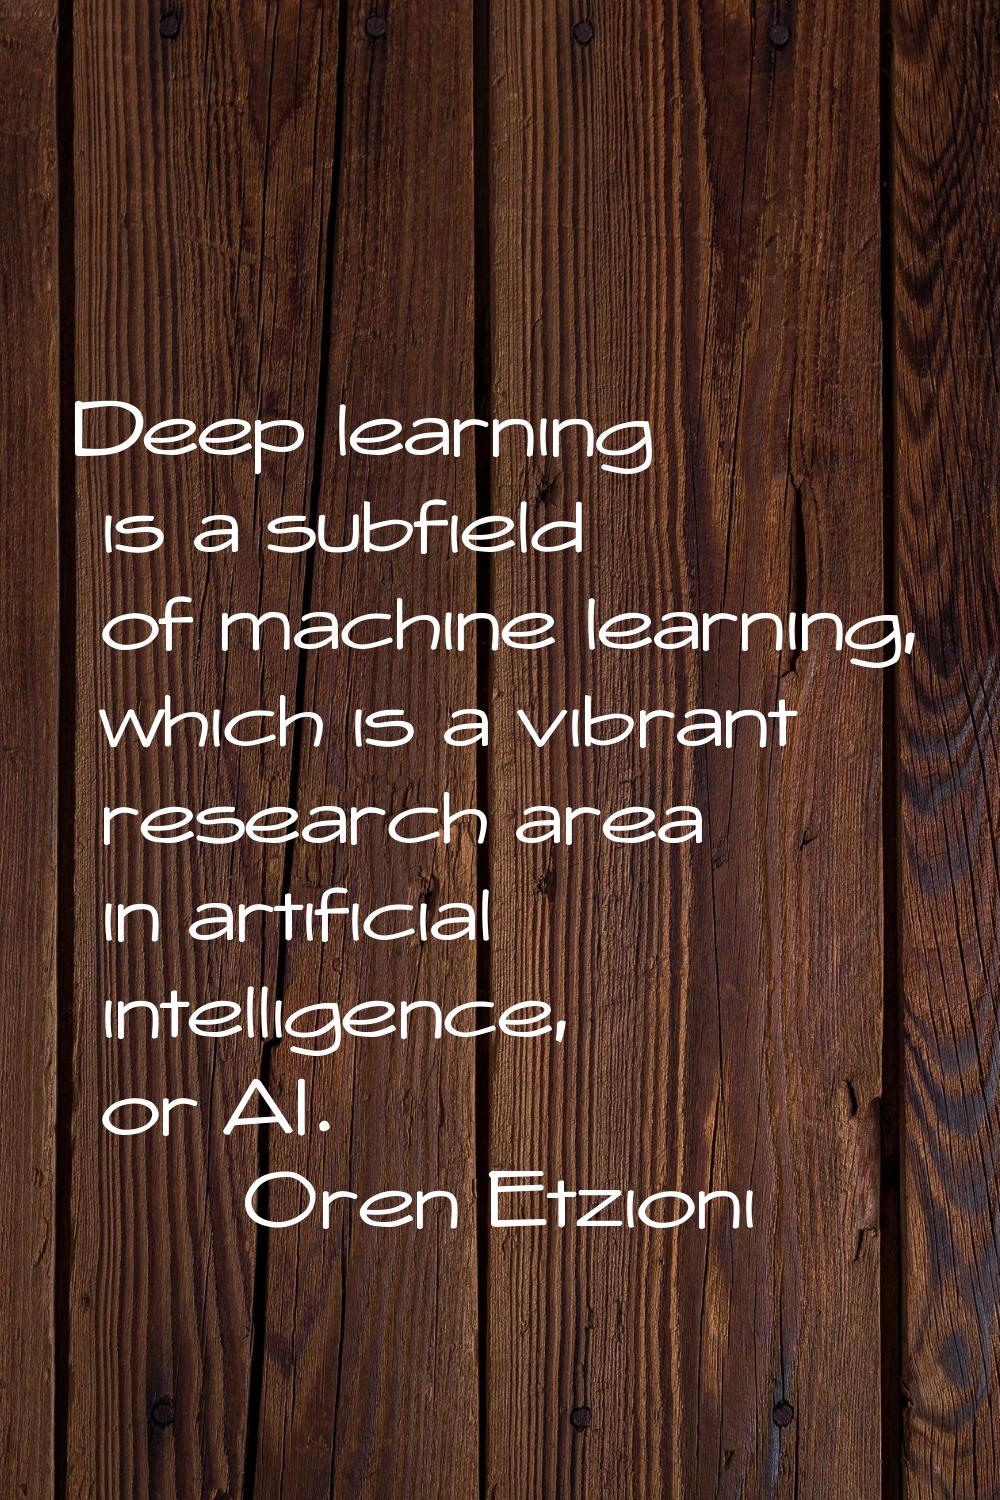 Deep learning is a subfield of machine learning, which is a vibrant research area in artificial int